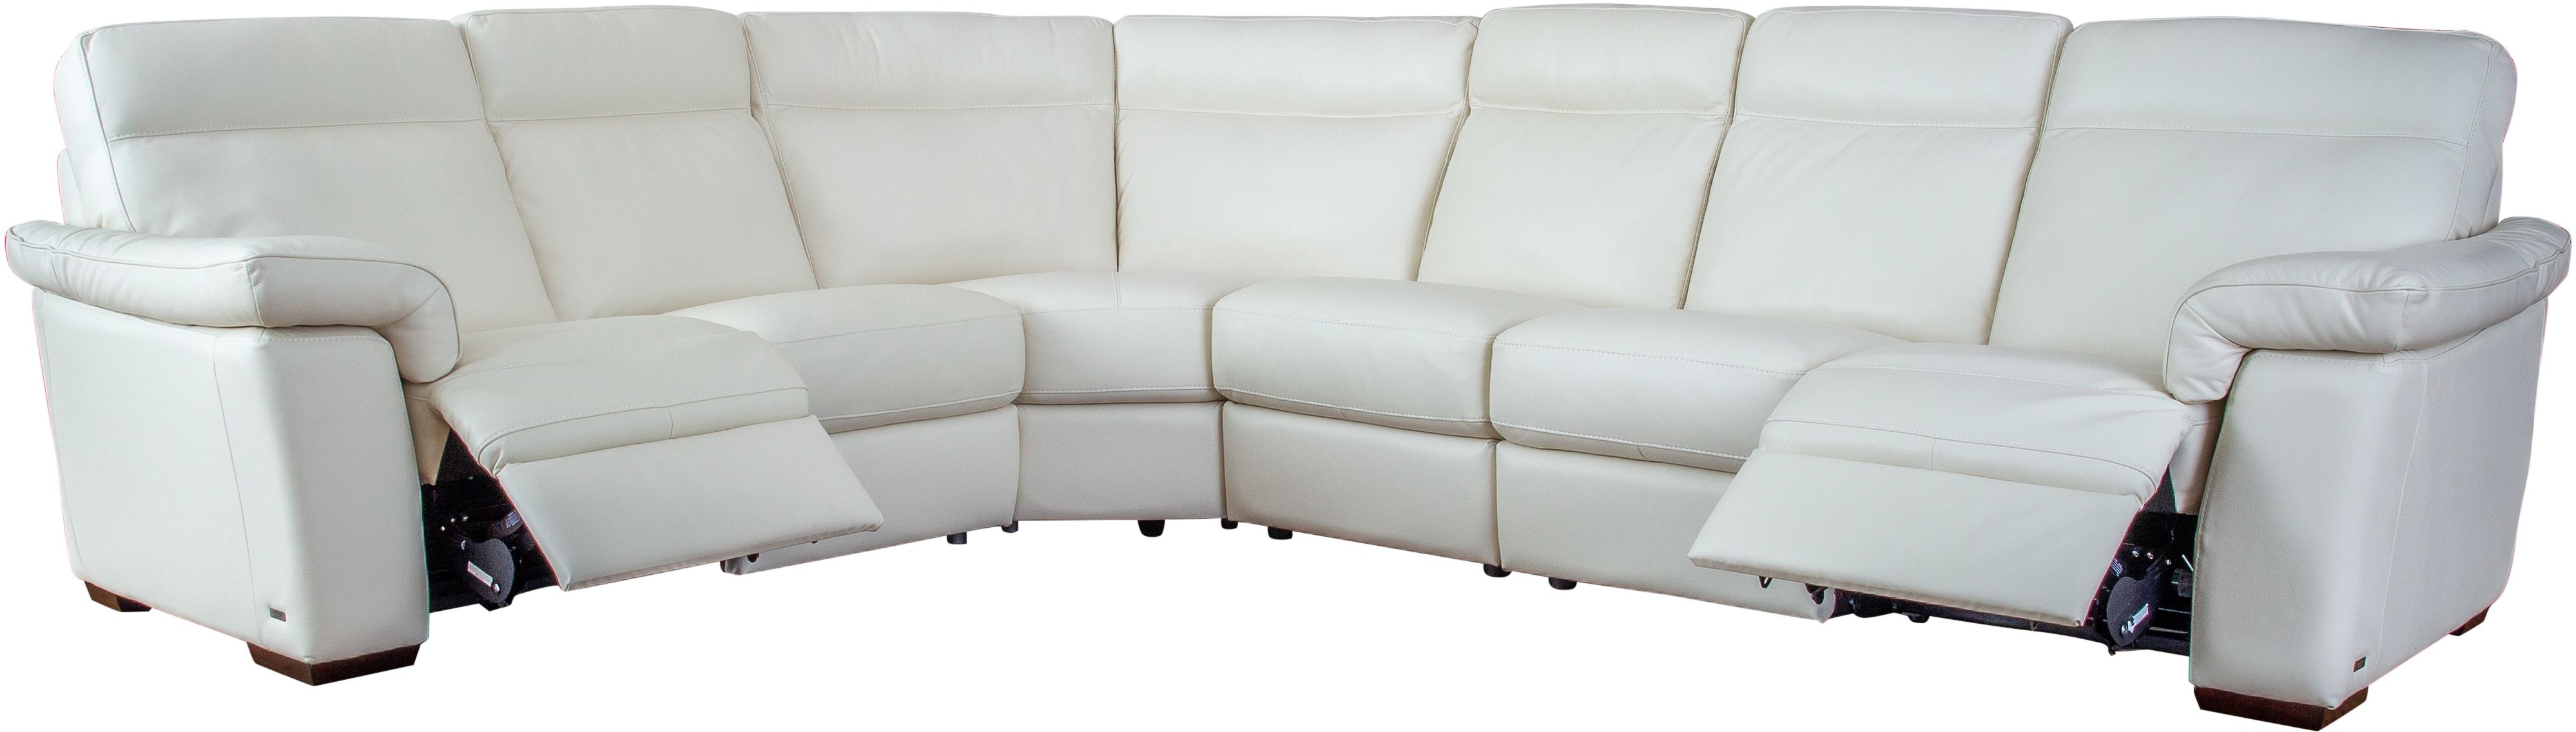 Power Fort - Florida 4pc Editions Leather Natuzzi Myers, FL Sectional - Gallery Reclining